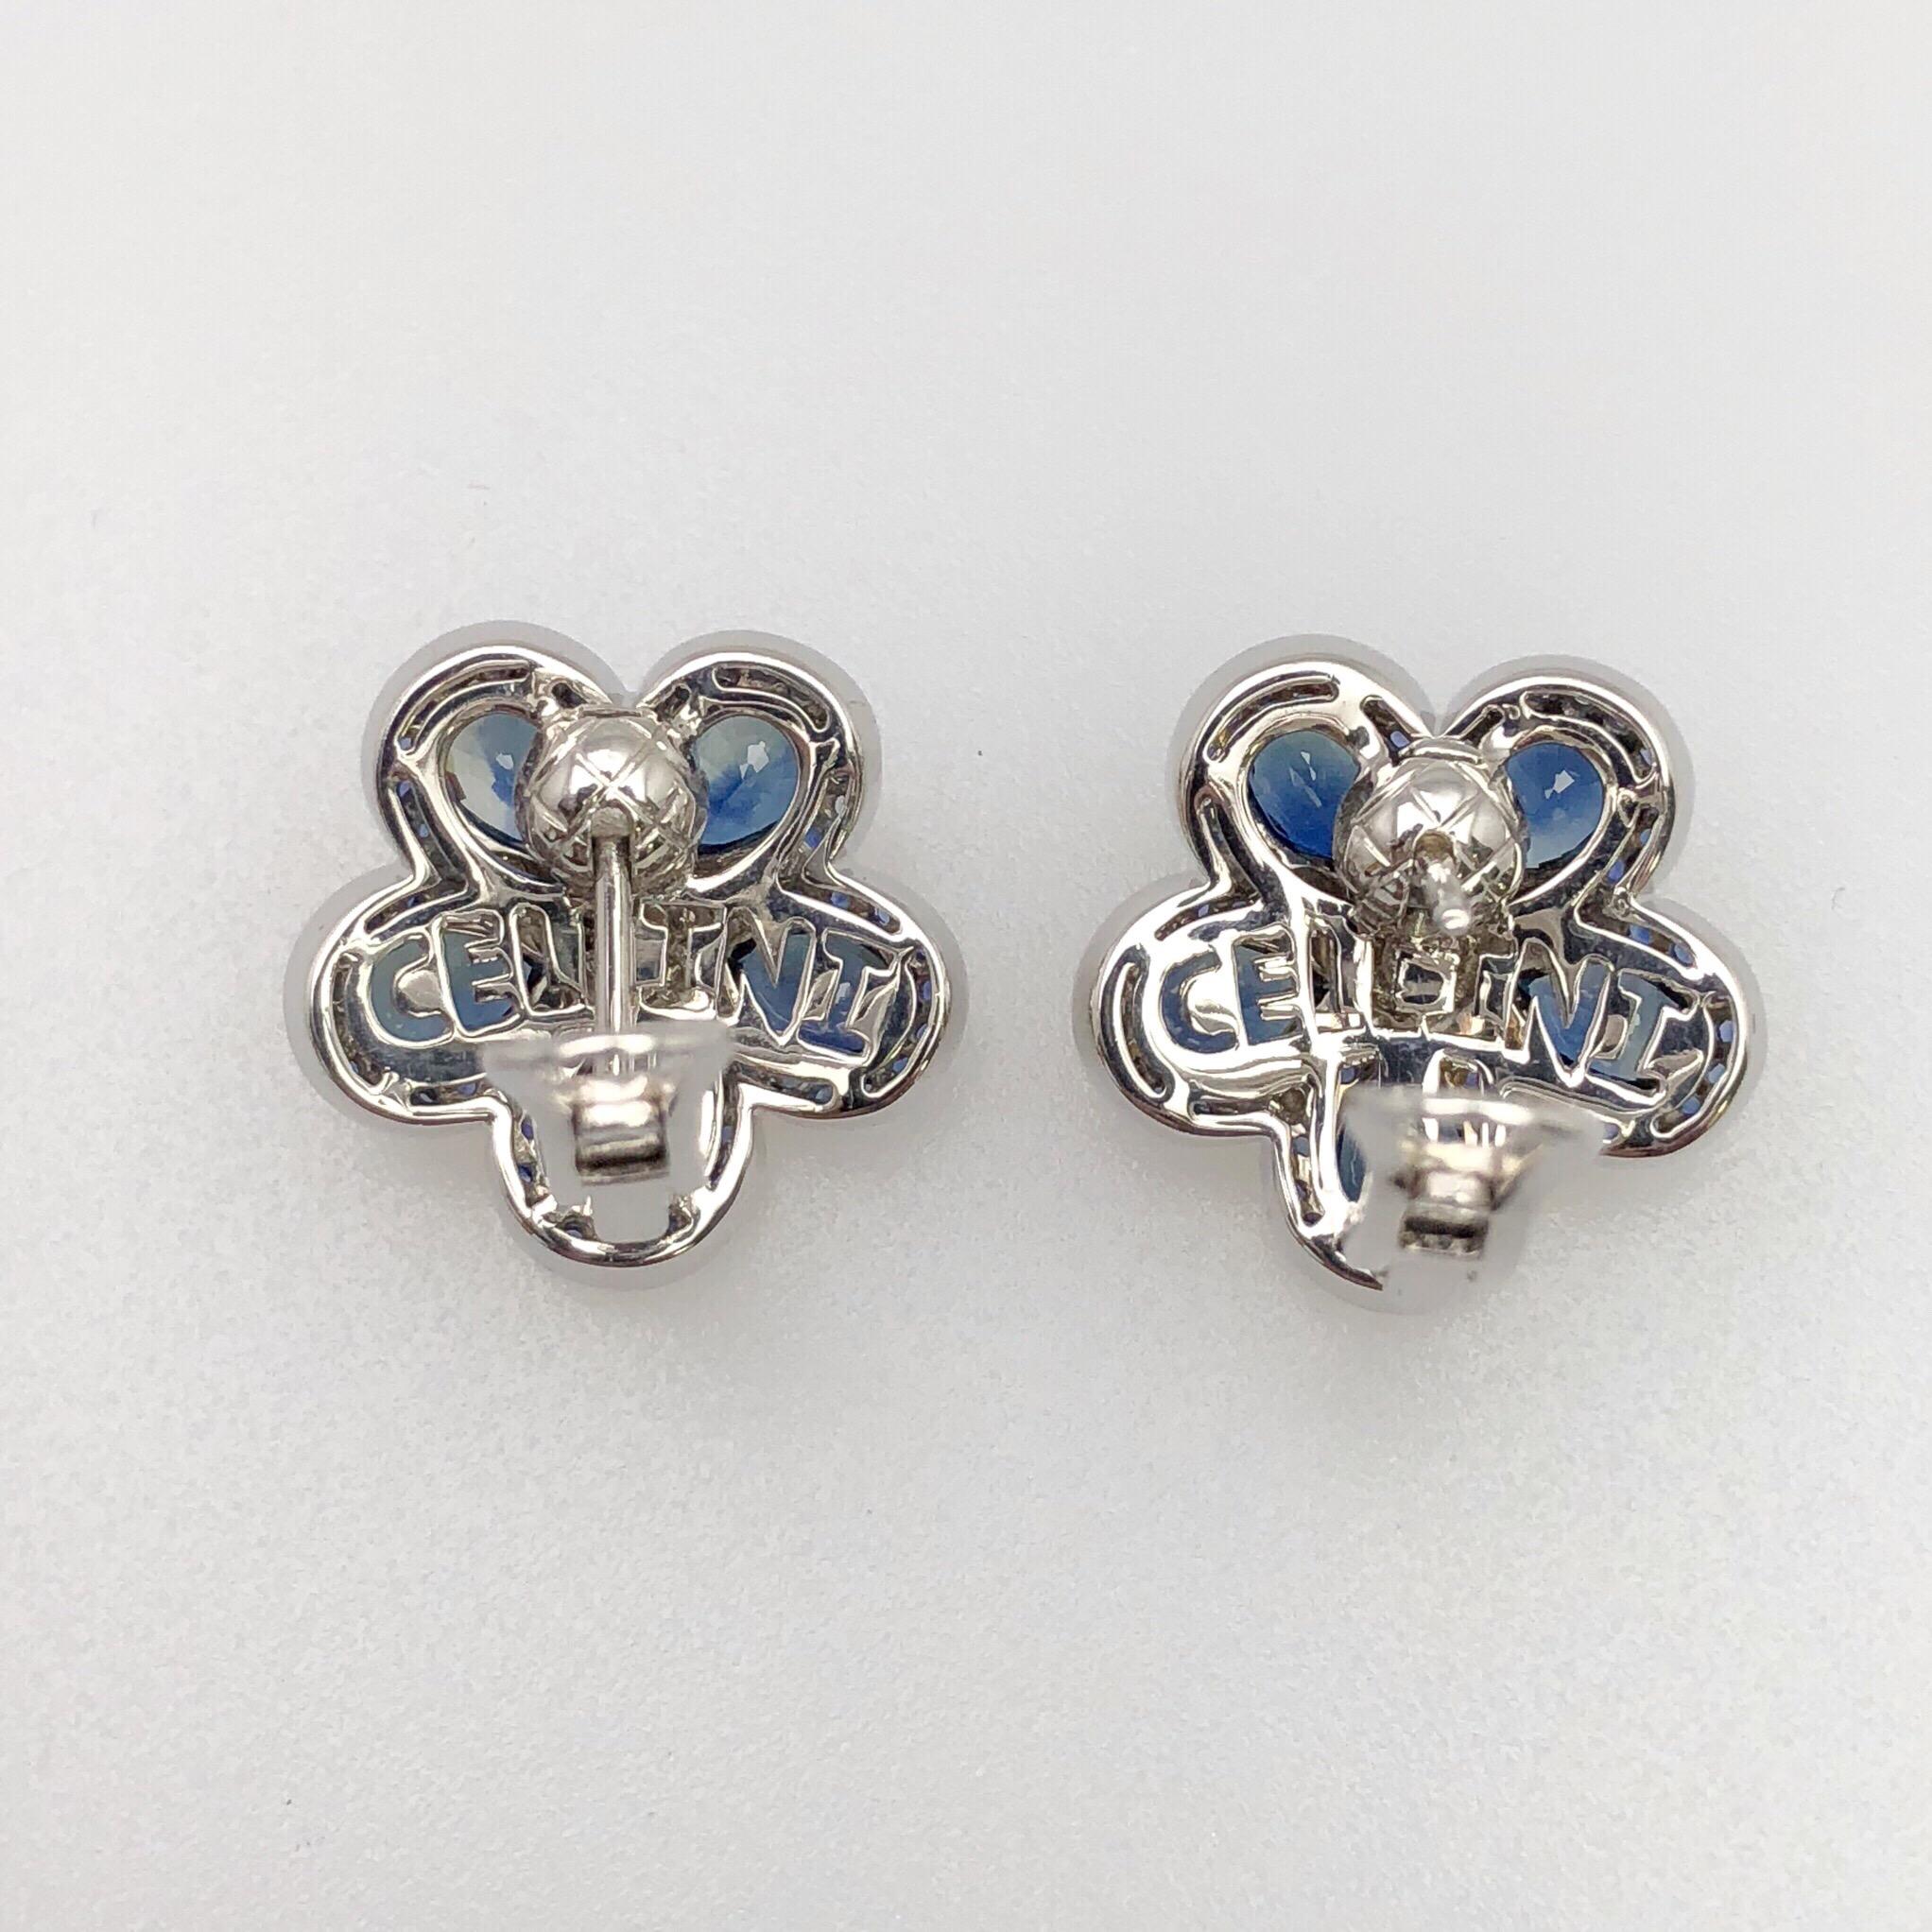 Cellini Jewelers iconic Flower Power earrings. These stunning earrings are composed of five pear shaped blue sapphires, with a round brilliant diamond center. Each petal and center are surrounded with micro pave. The Flower measures approximately